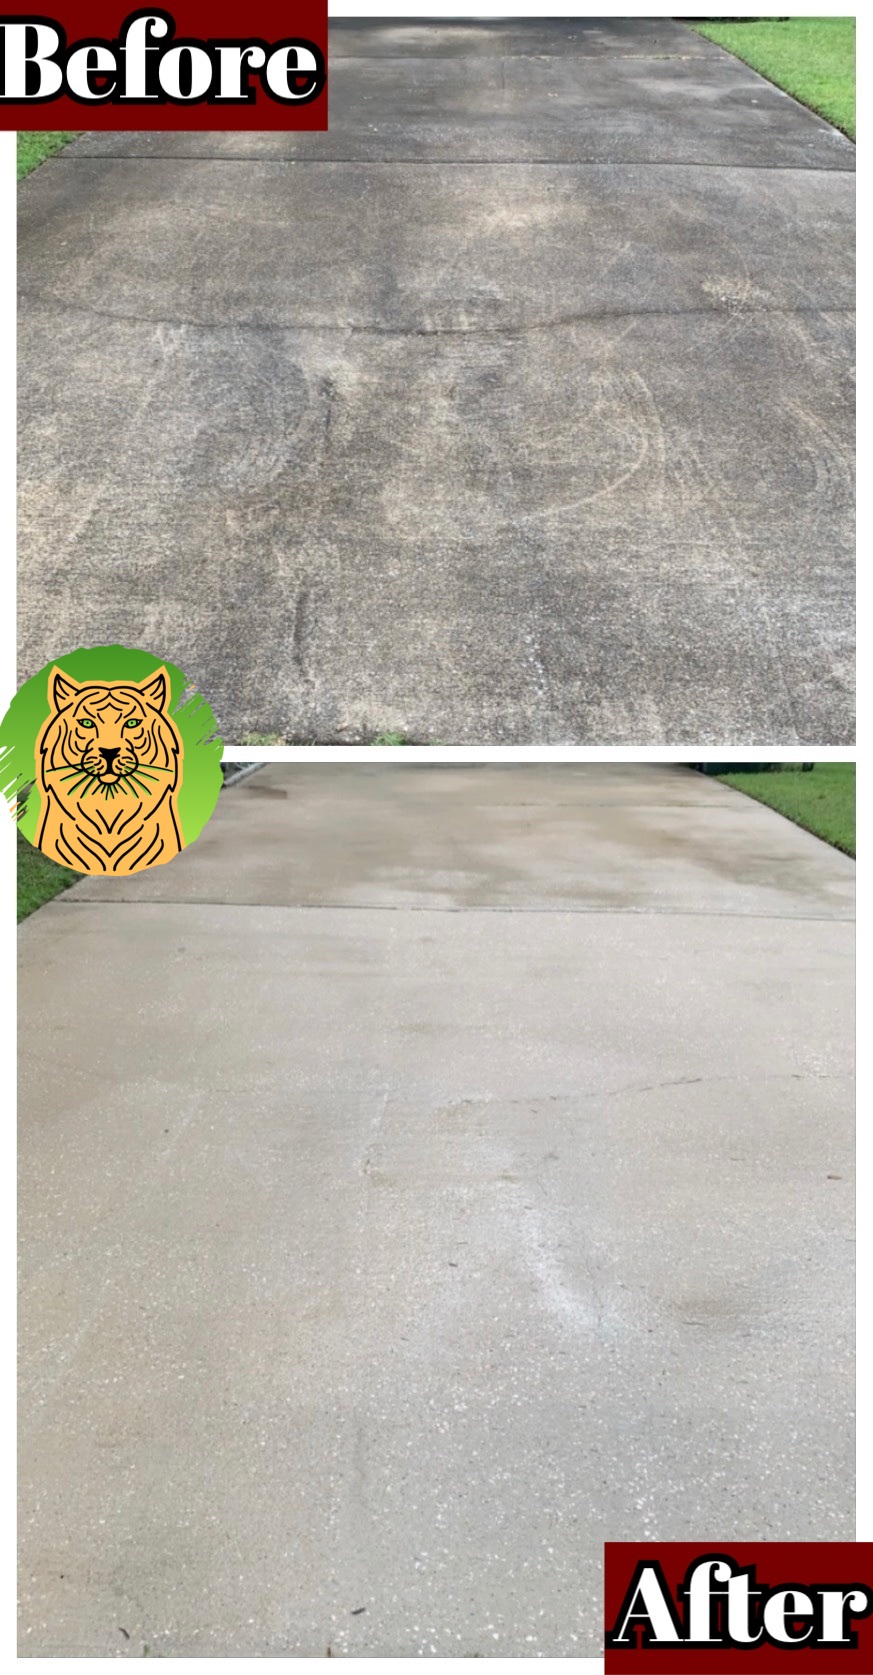 Best quality Driveway Cleaning (Concrete pressure washing) in city of Placentia, CA. Thumbnail